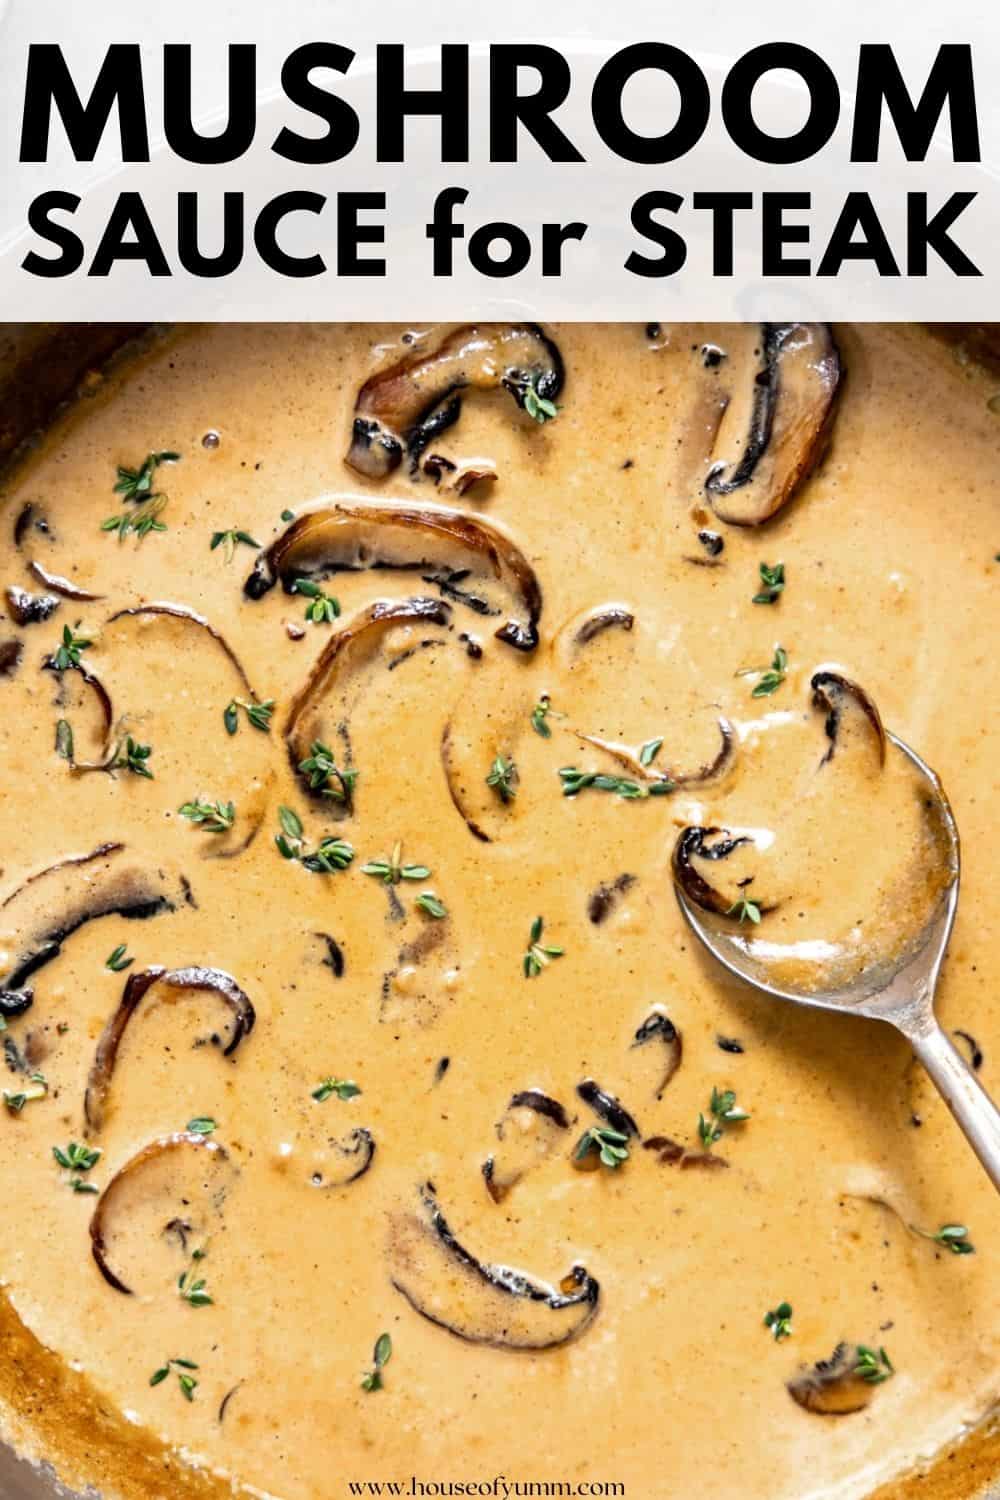 Mushroom sauce for steak with text.